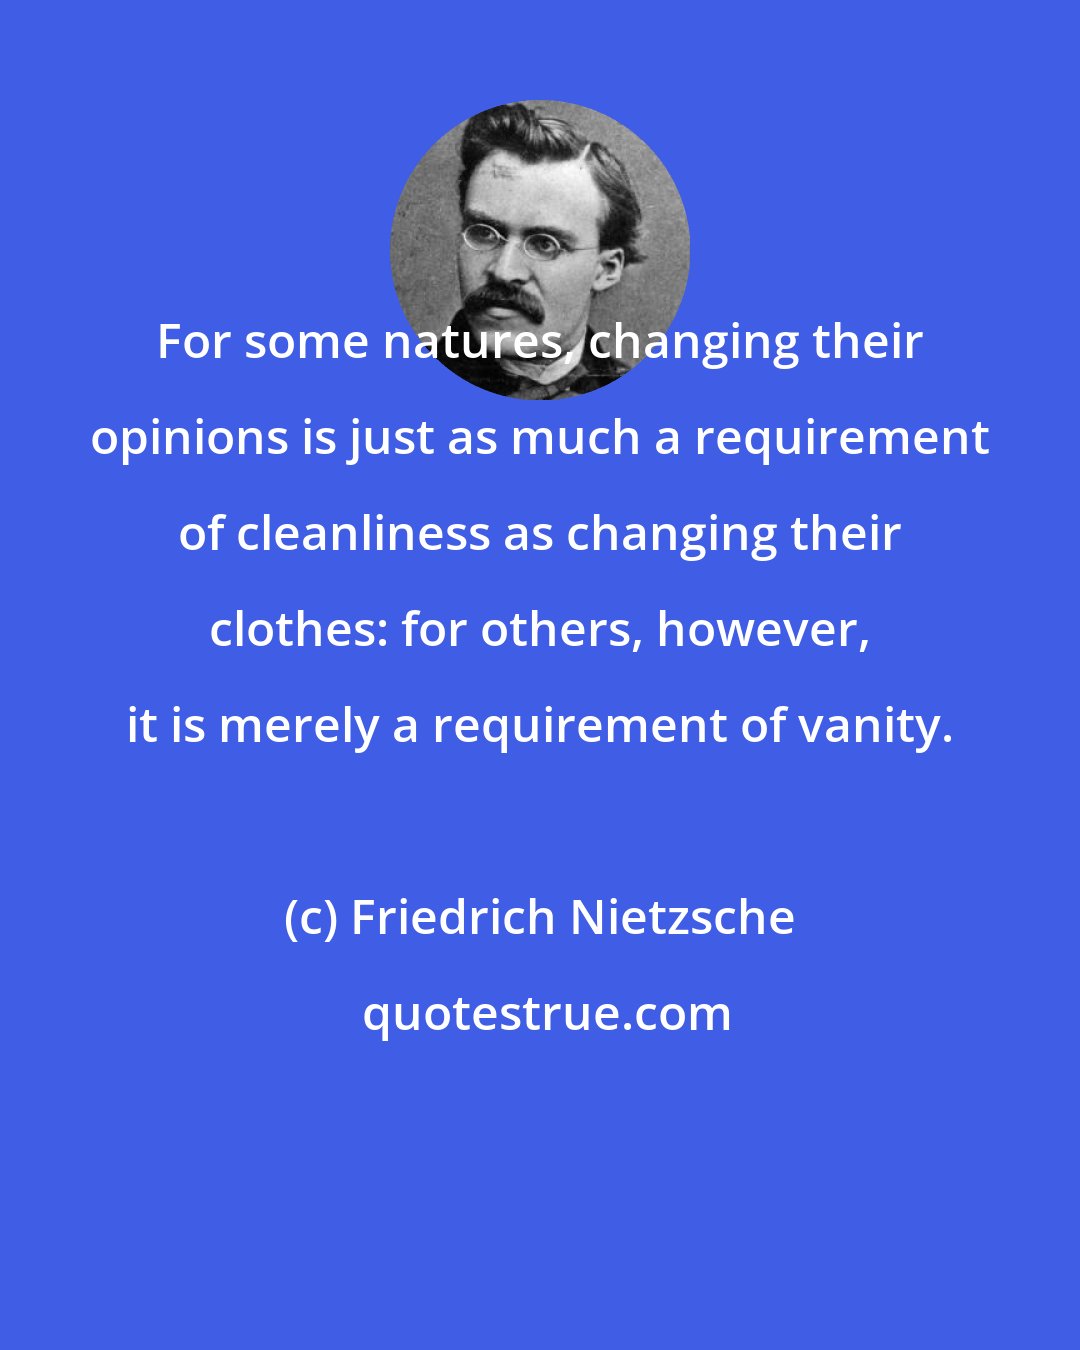 Friedrich Nietzsche: For some natures, changing their opinions is just as much a requirement of cleanliness as changing their clothes: for others, however, it is merely a requirement of vanity.